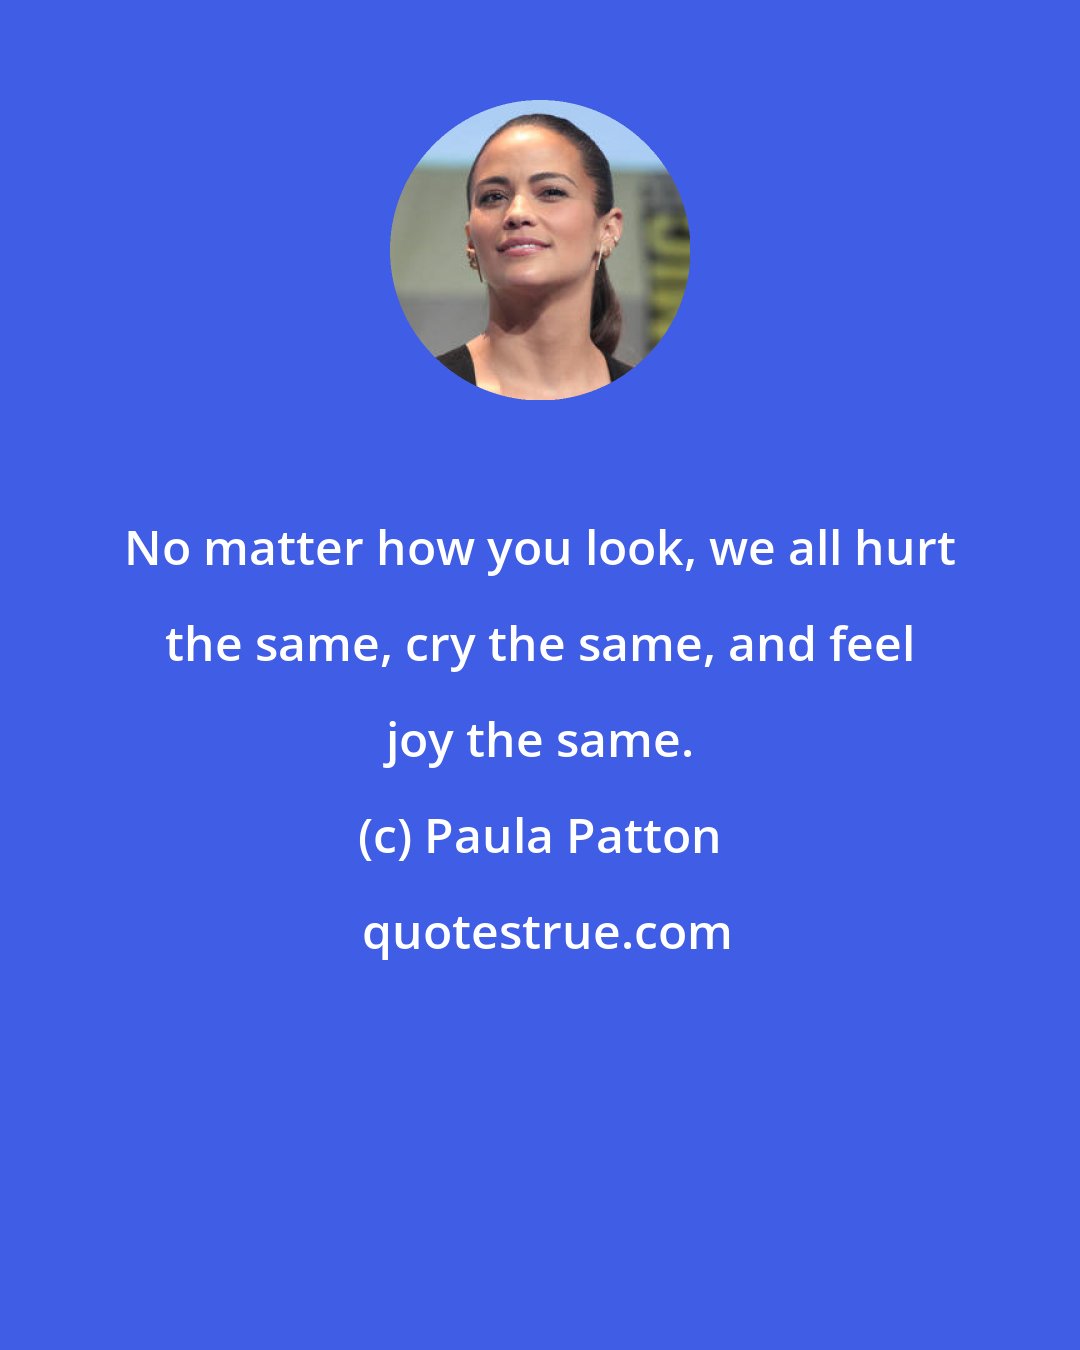 Paula Patton: No matter how you look, we all hurt the same, cry the same, and feel joy the same.